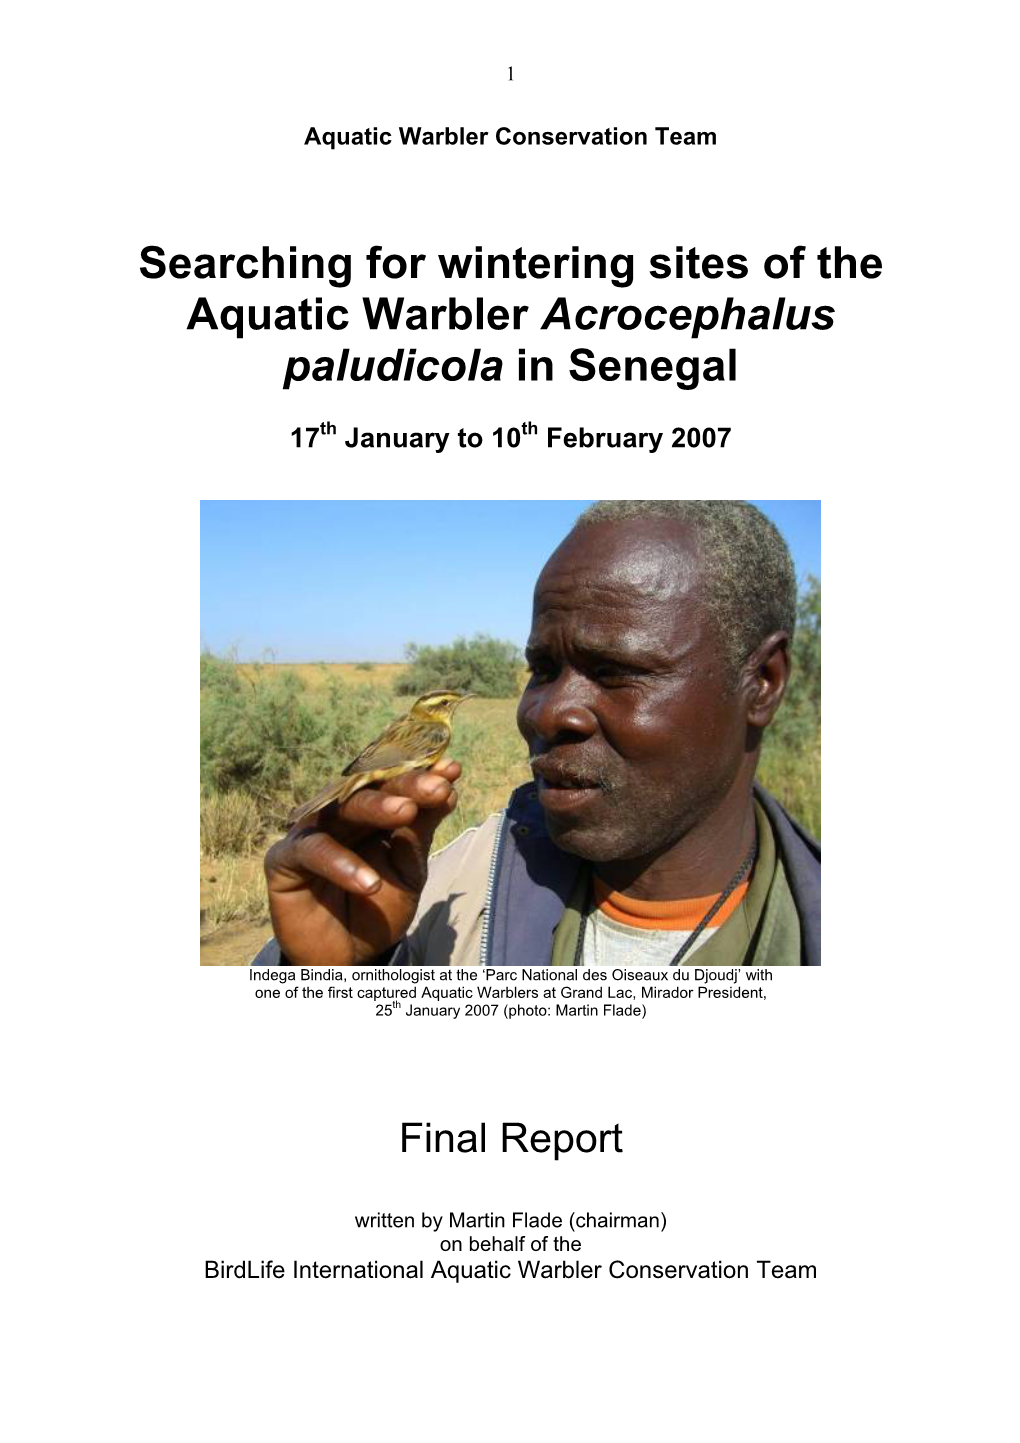 Searching for Wintering Sites of the Aquatic Warbler Acrocephalus Paludicola in Senegal